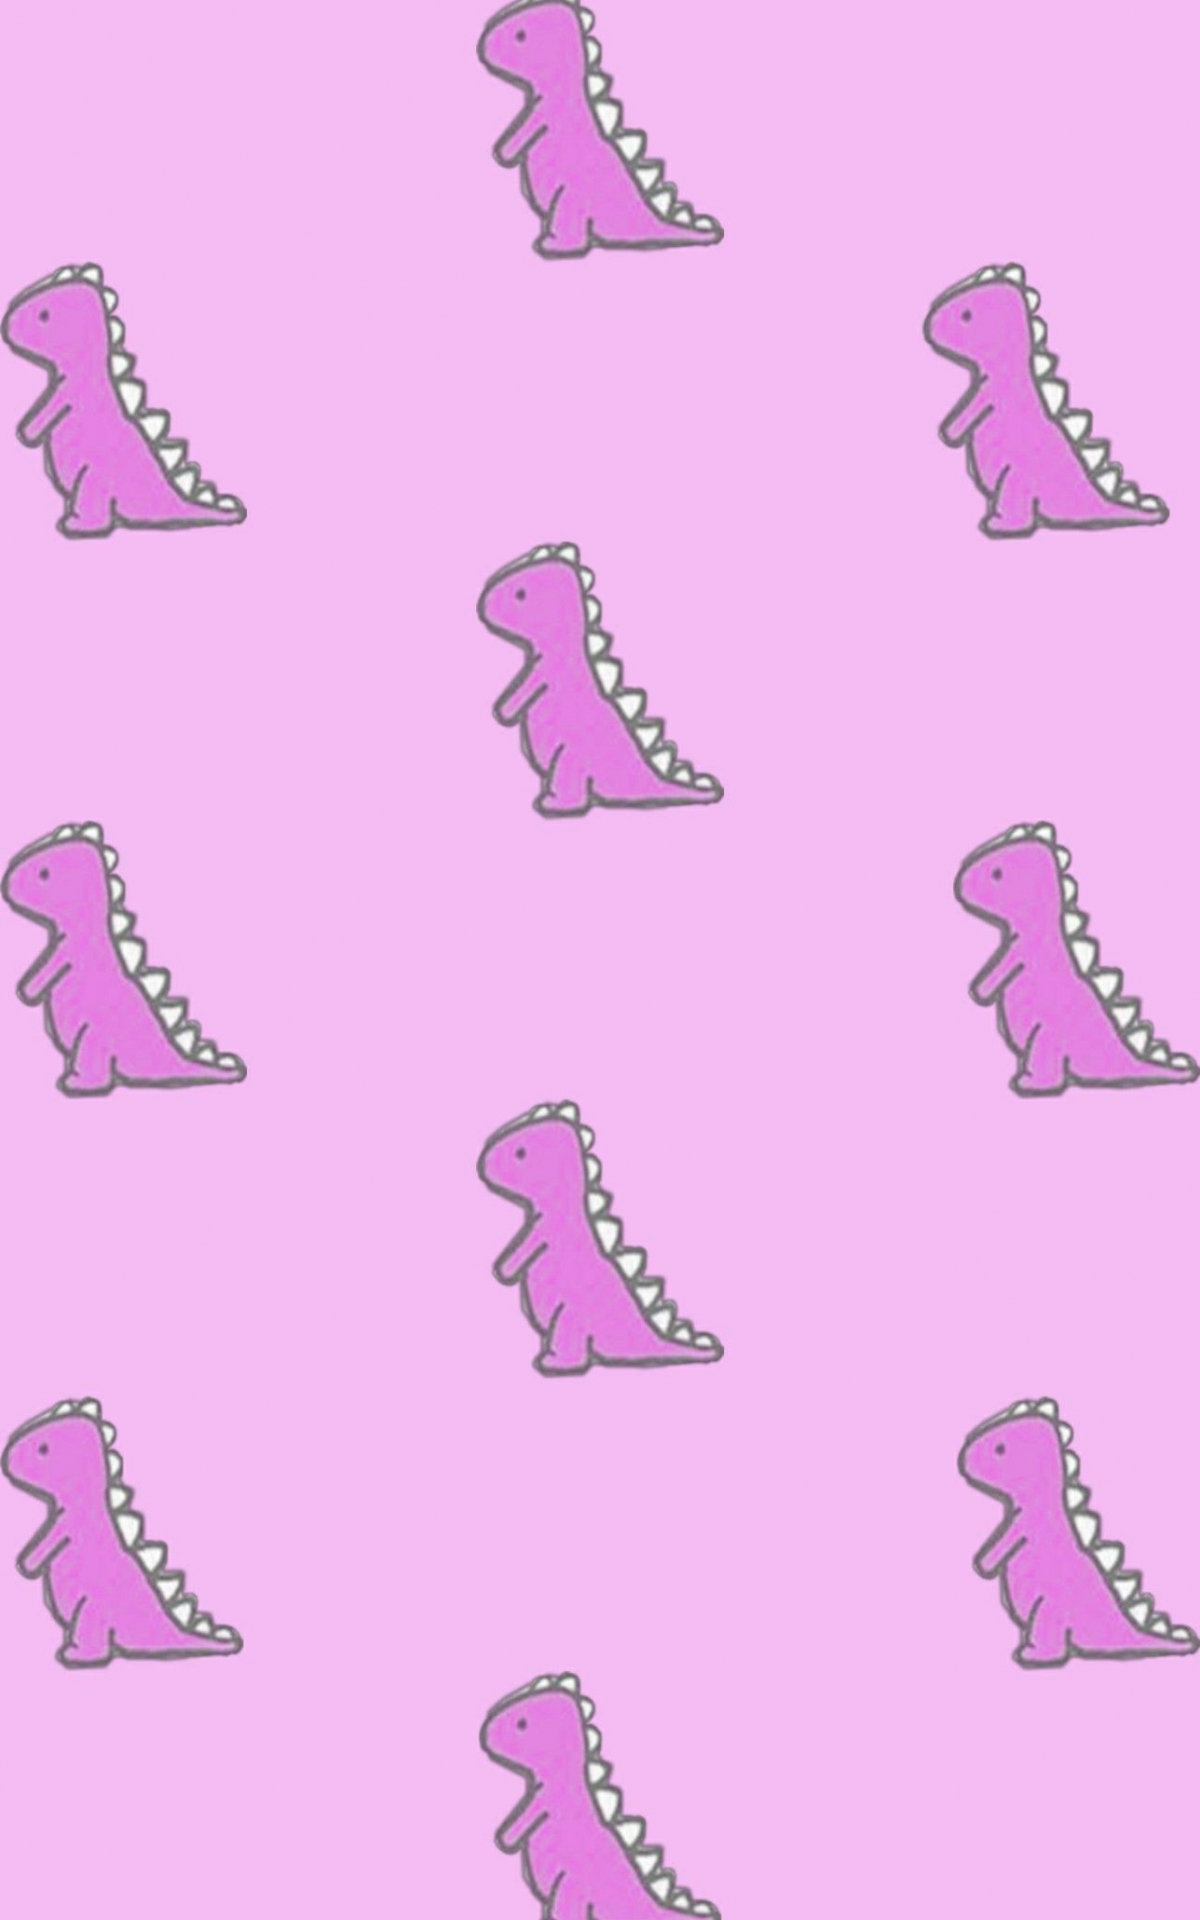 Aesthetic Dino Wallpapers